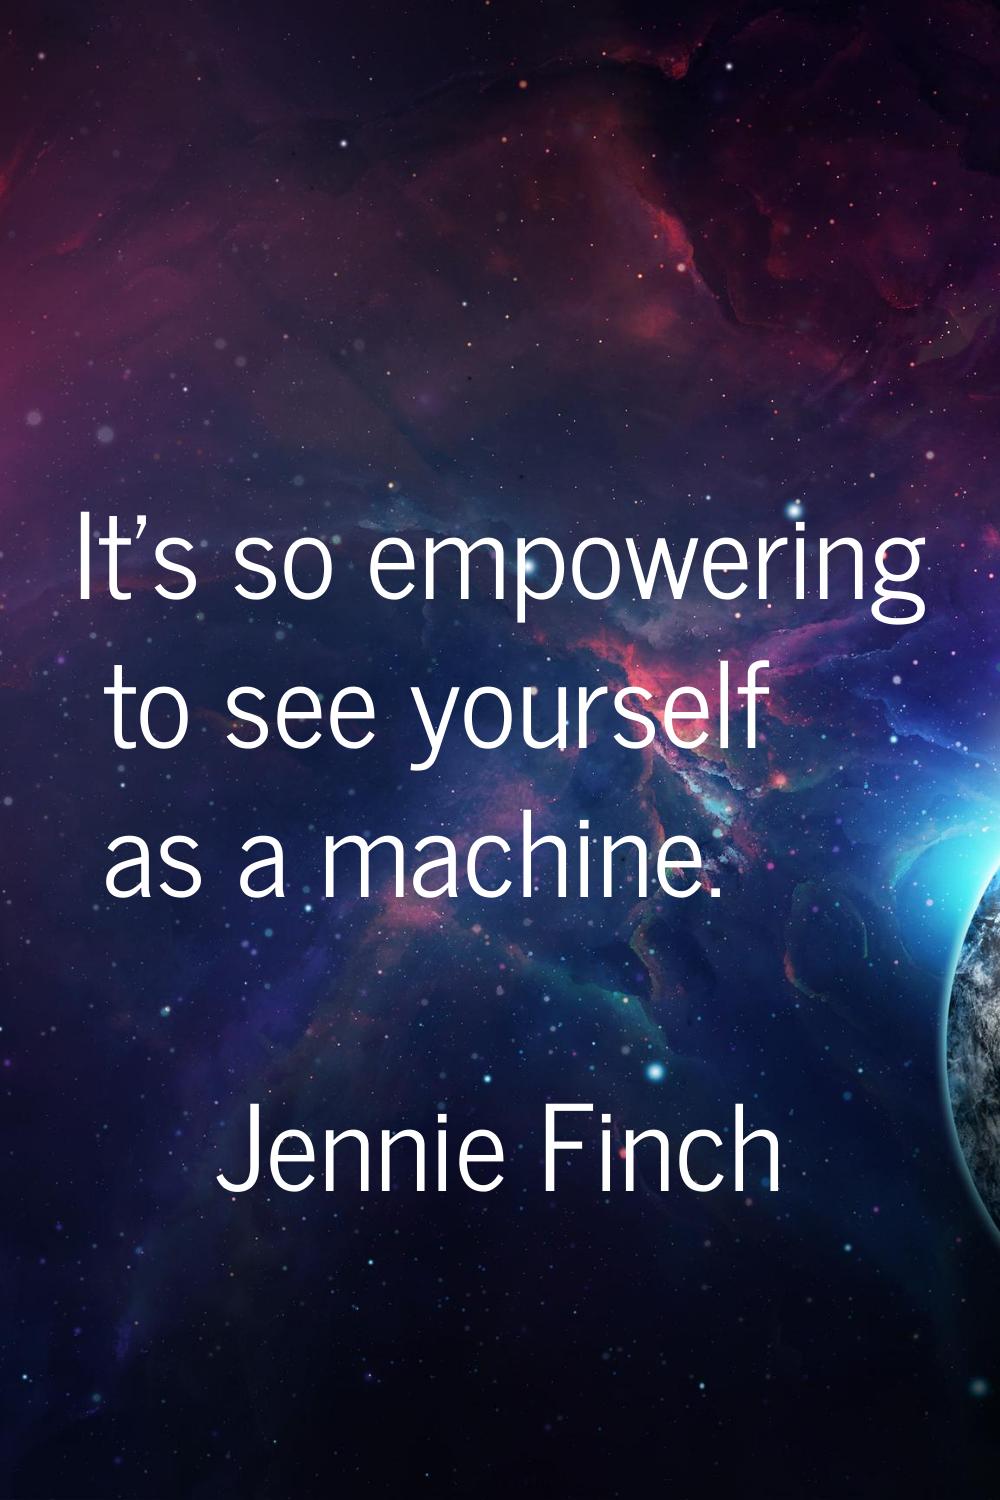 It's so empowering to see yourself as a machine.